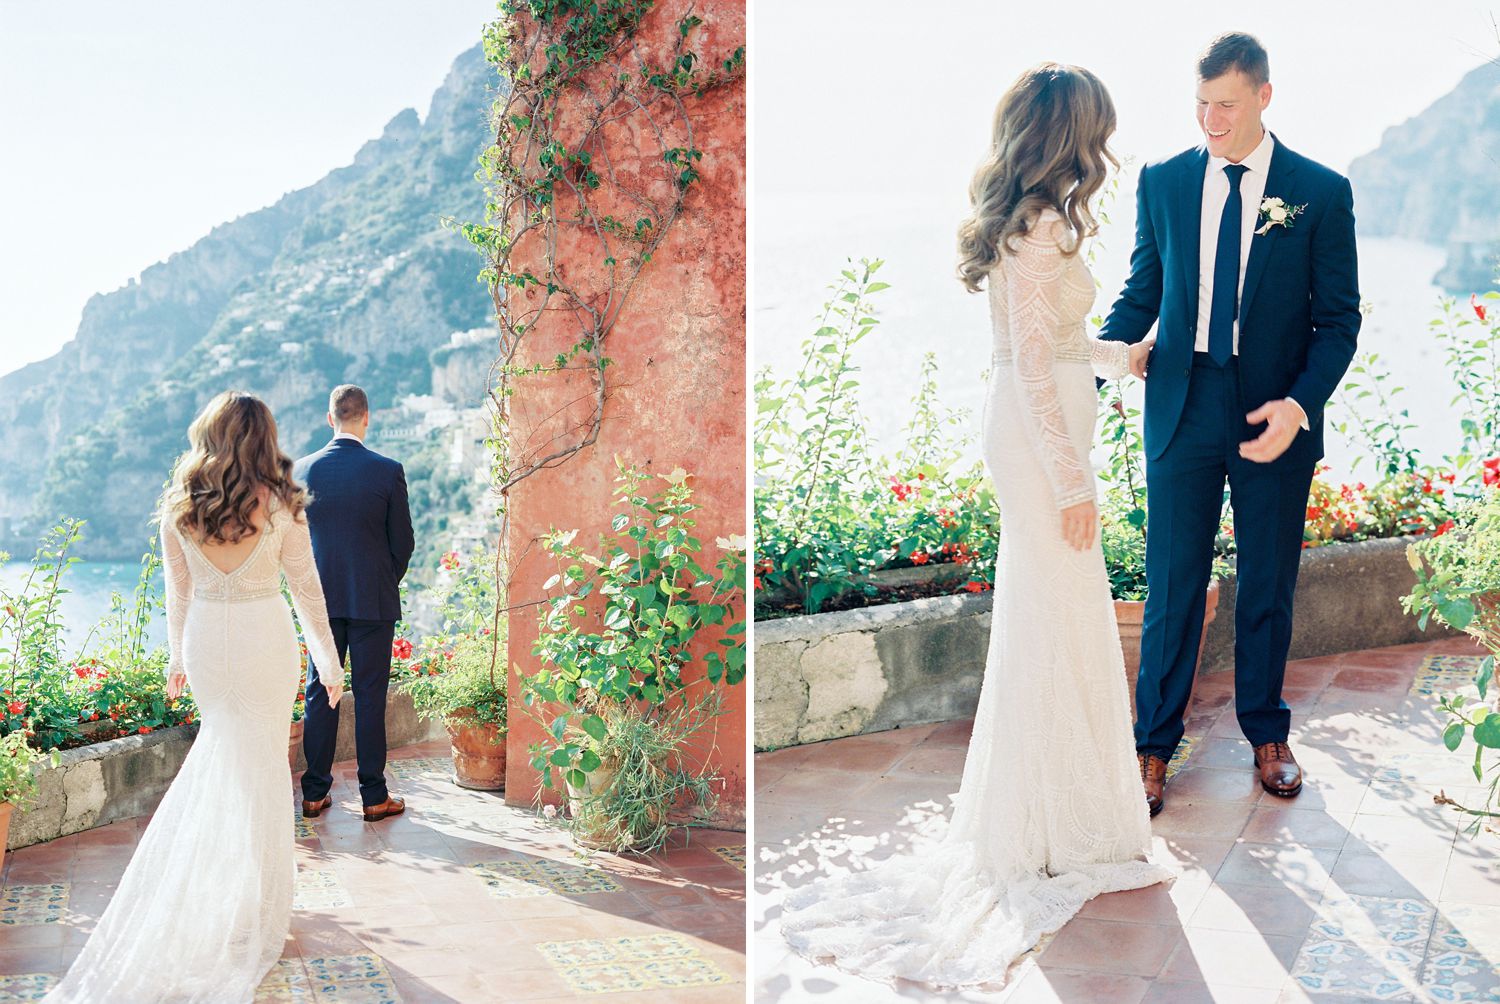 Wedding at the red terrace at Marincanto Hotel in Positano